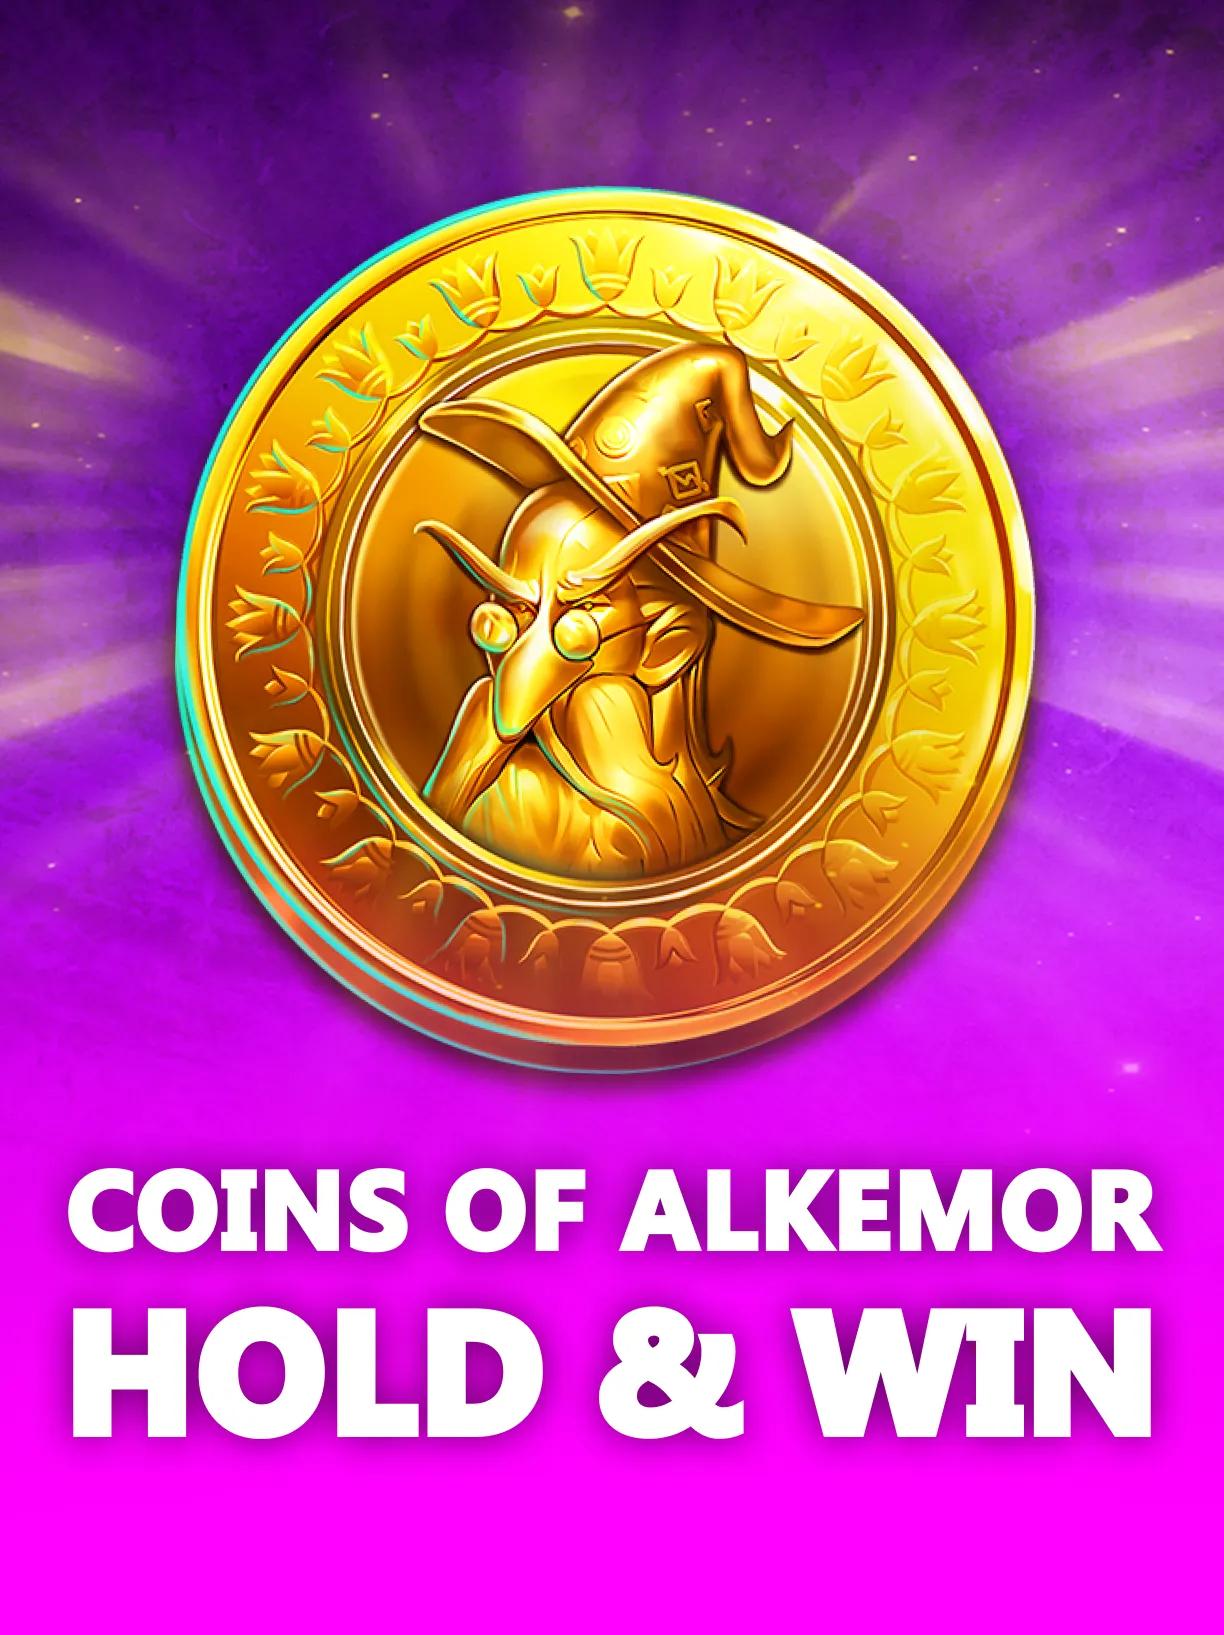 Coins of Alkemor – HOLD & WIN